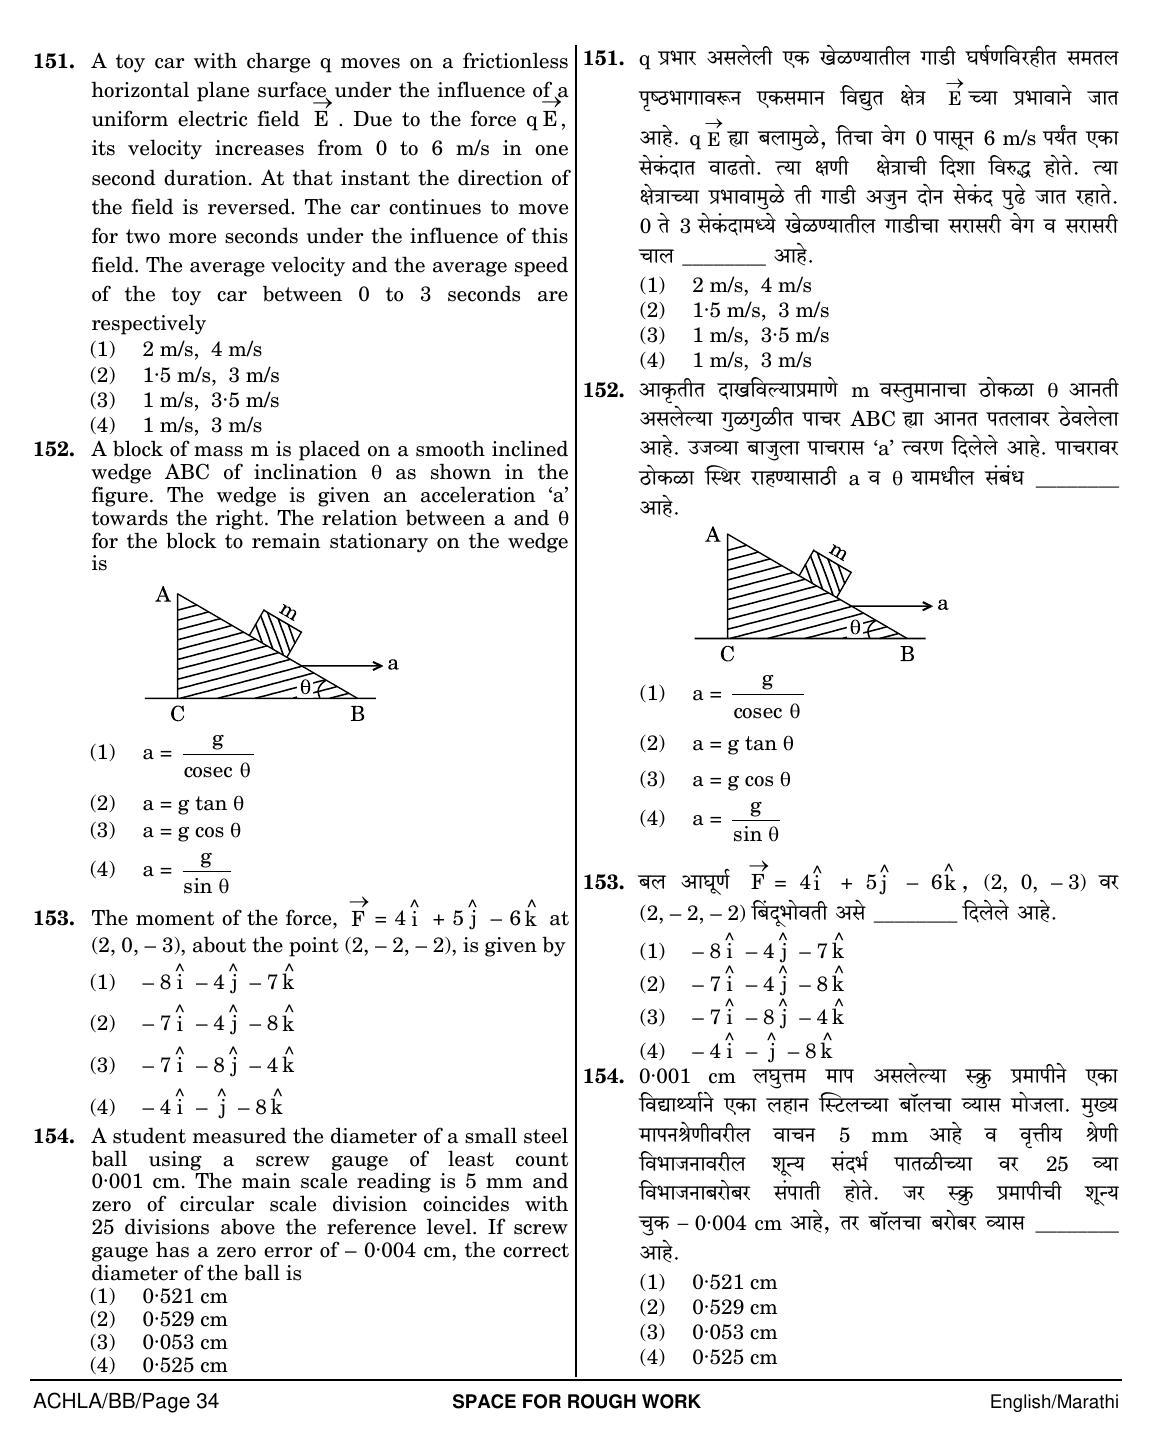 NEET Marathi BB 2018 Question Paper - Page 34